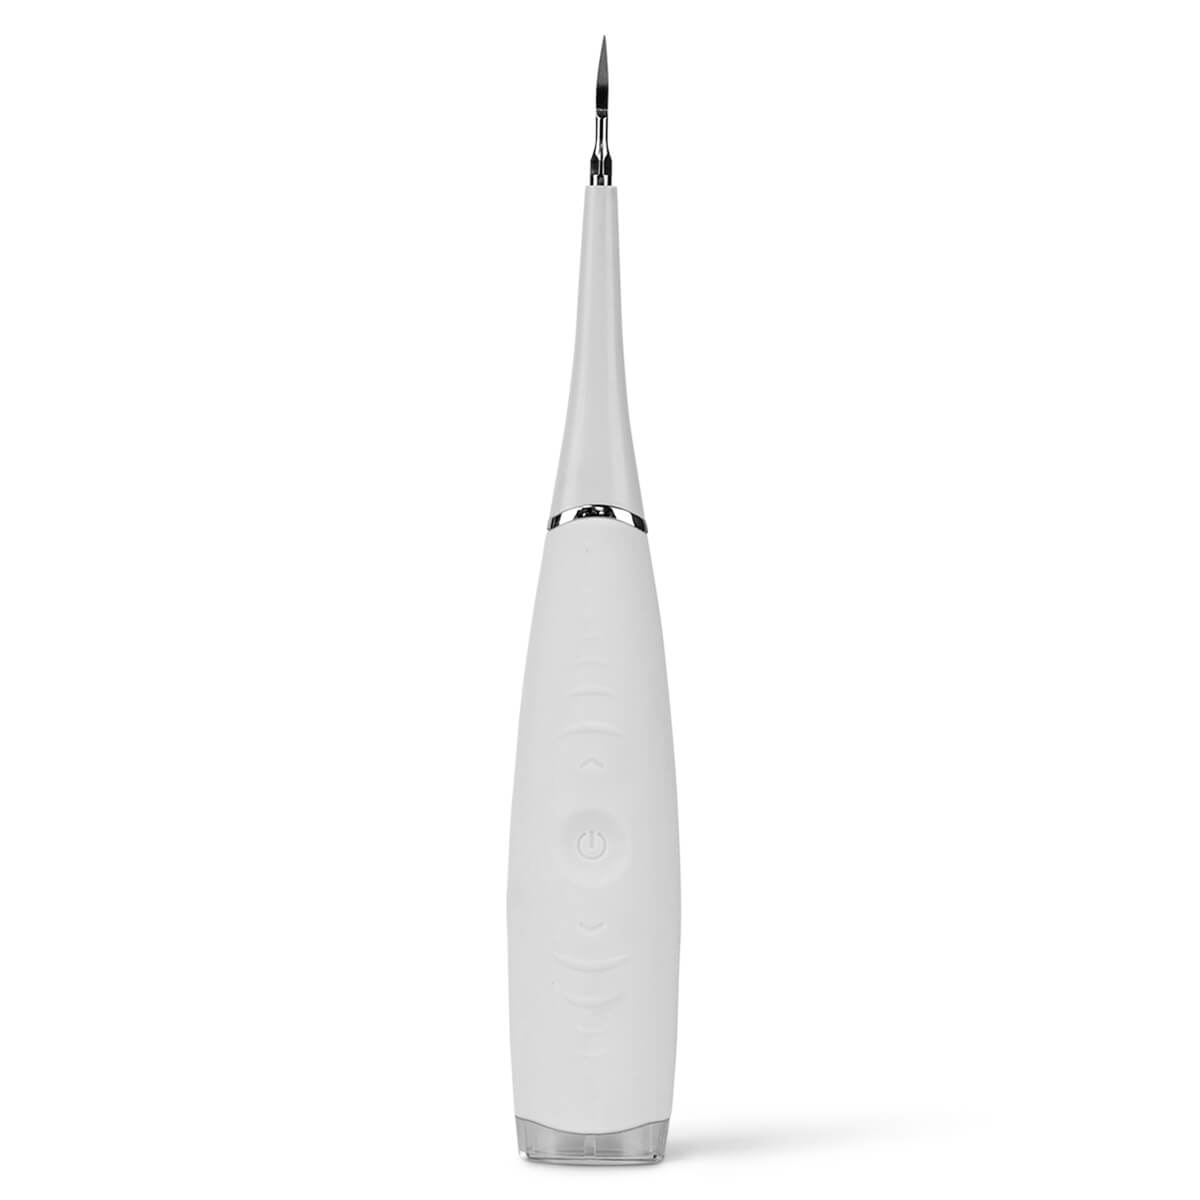 Ultrasonic Tooth Cleaner - Smile Therapy